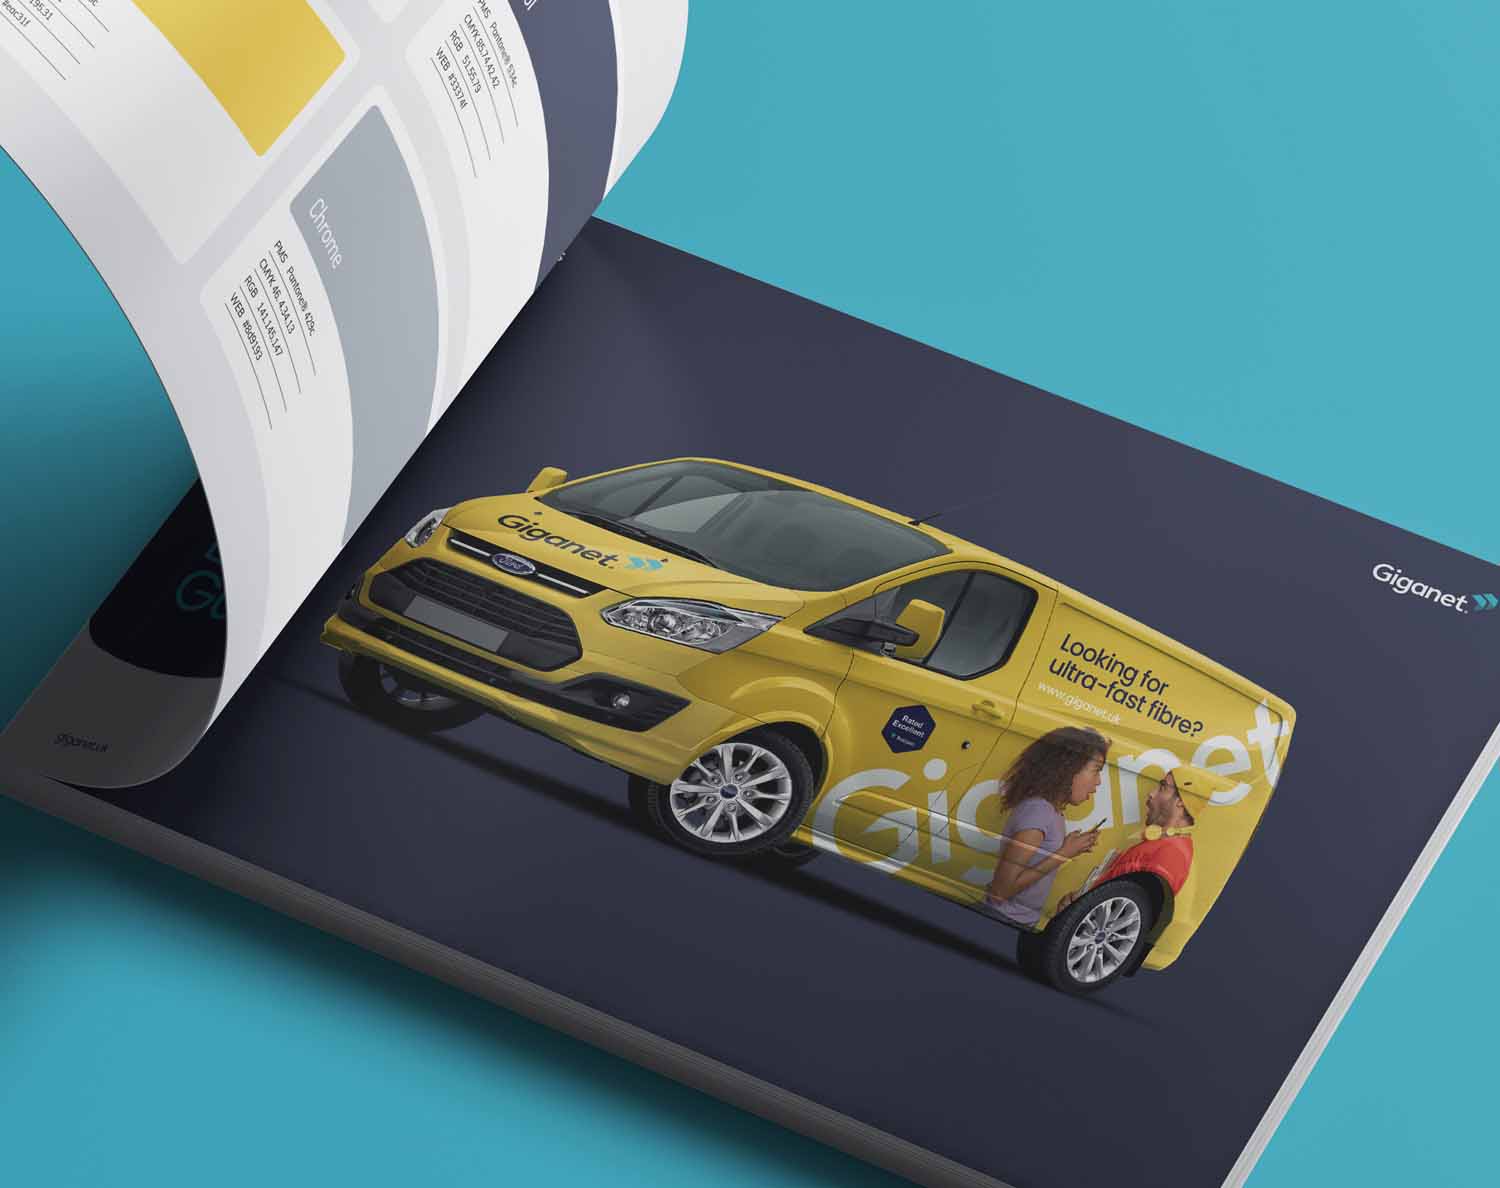 Brand guidelines for Giganet full fibre showing vehicle livery- created by Crux Design Agency